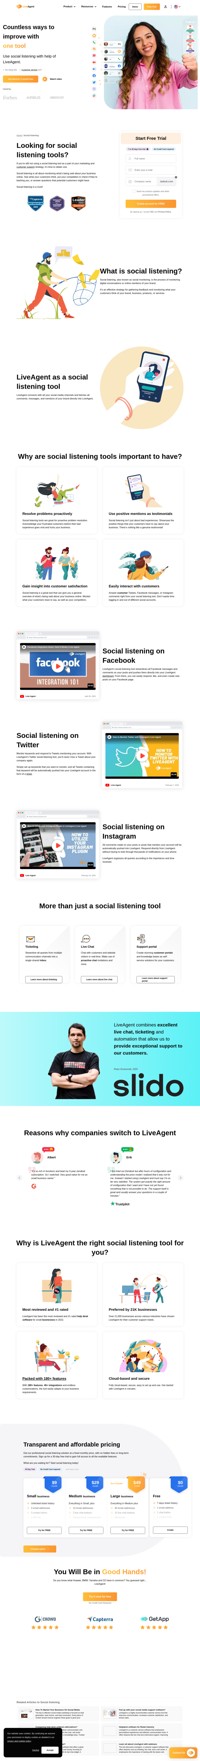 LiveAgent's social listening tools are great for proactive problem resolution. Get a complete overview of what's being said about your business today.